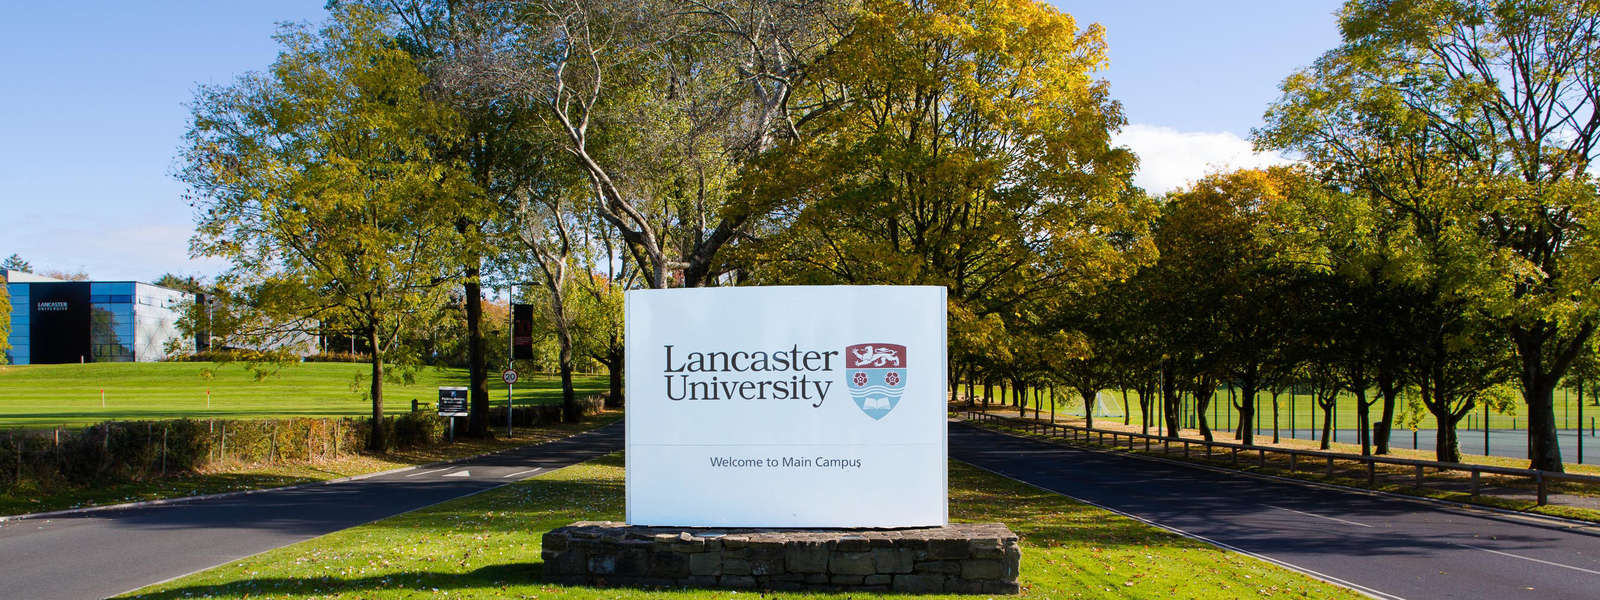 Entrance road into Lancaster campus. A sign surrounded by trees says welcome.